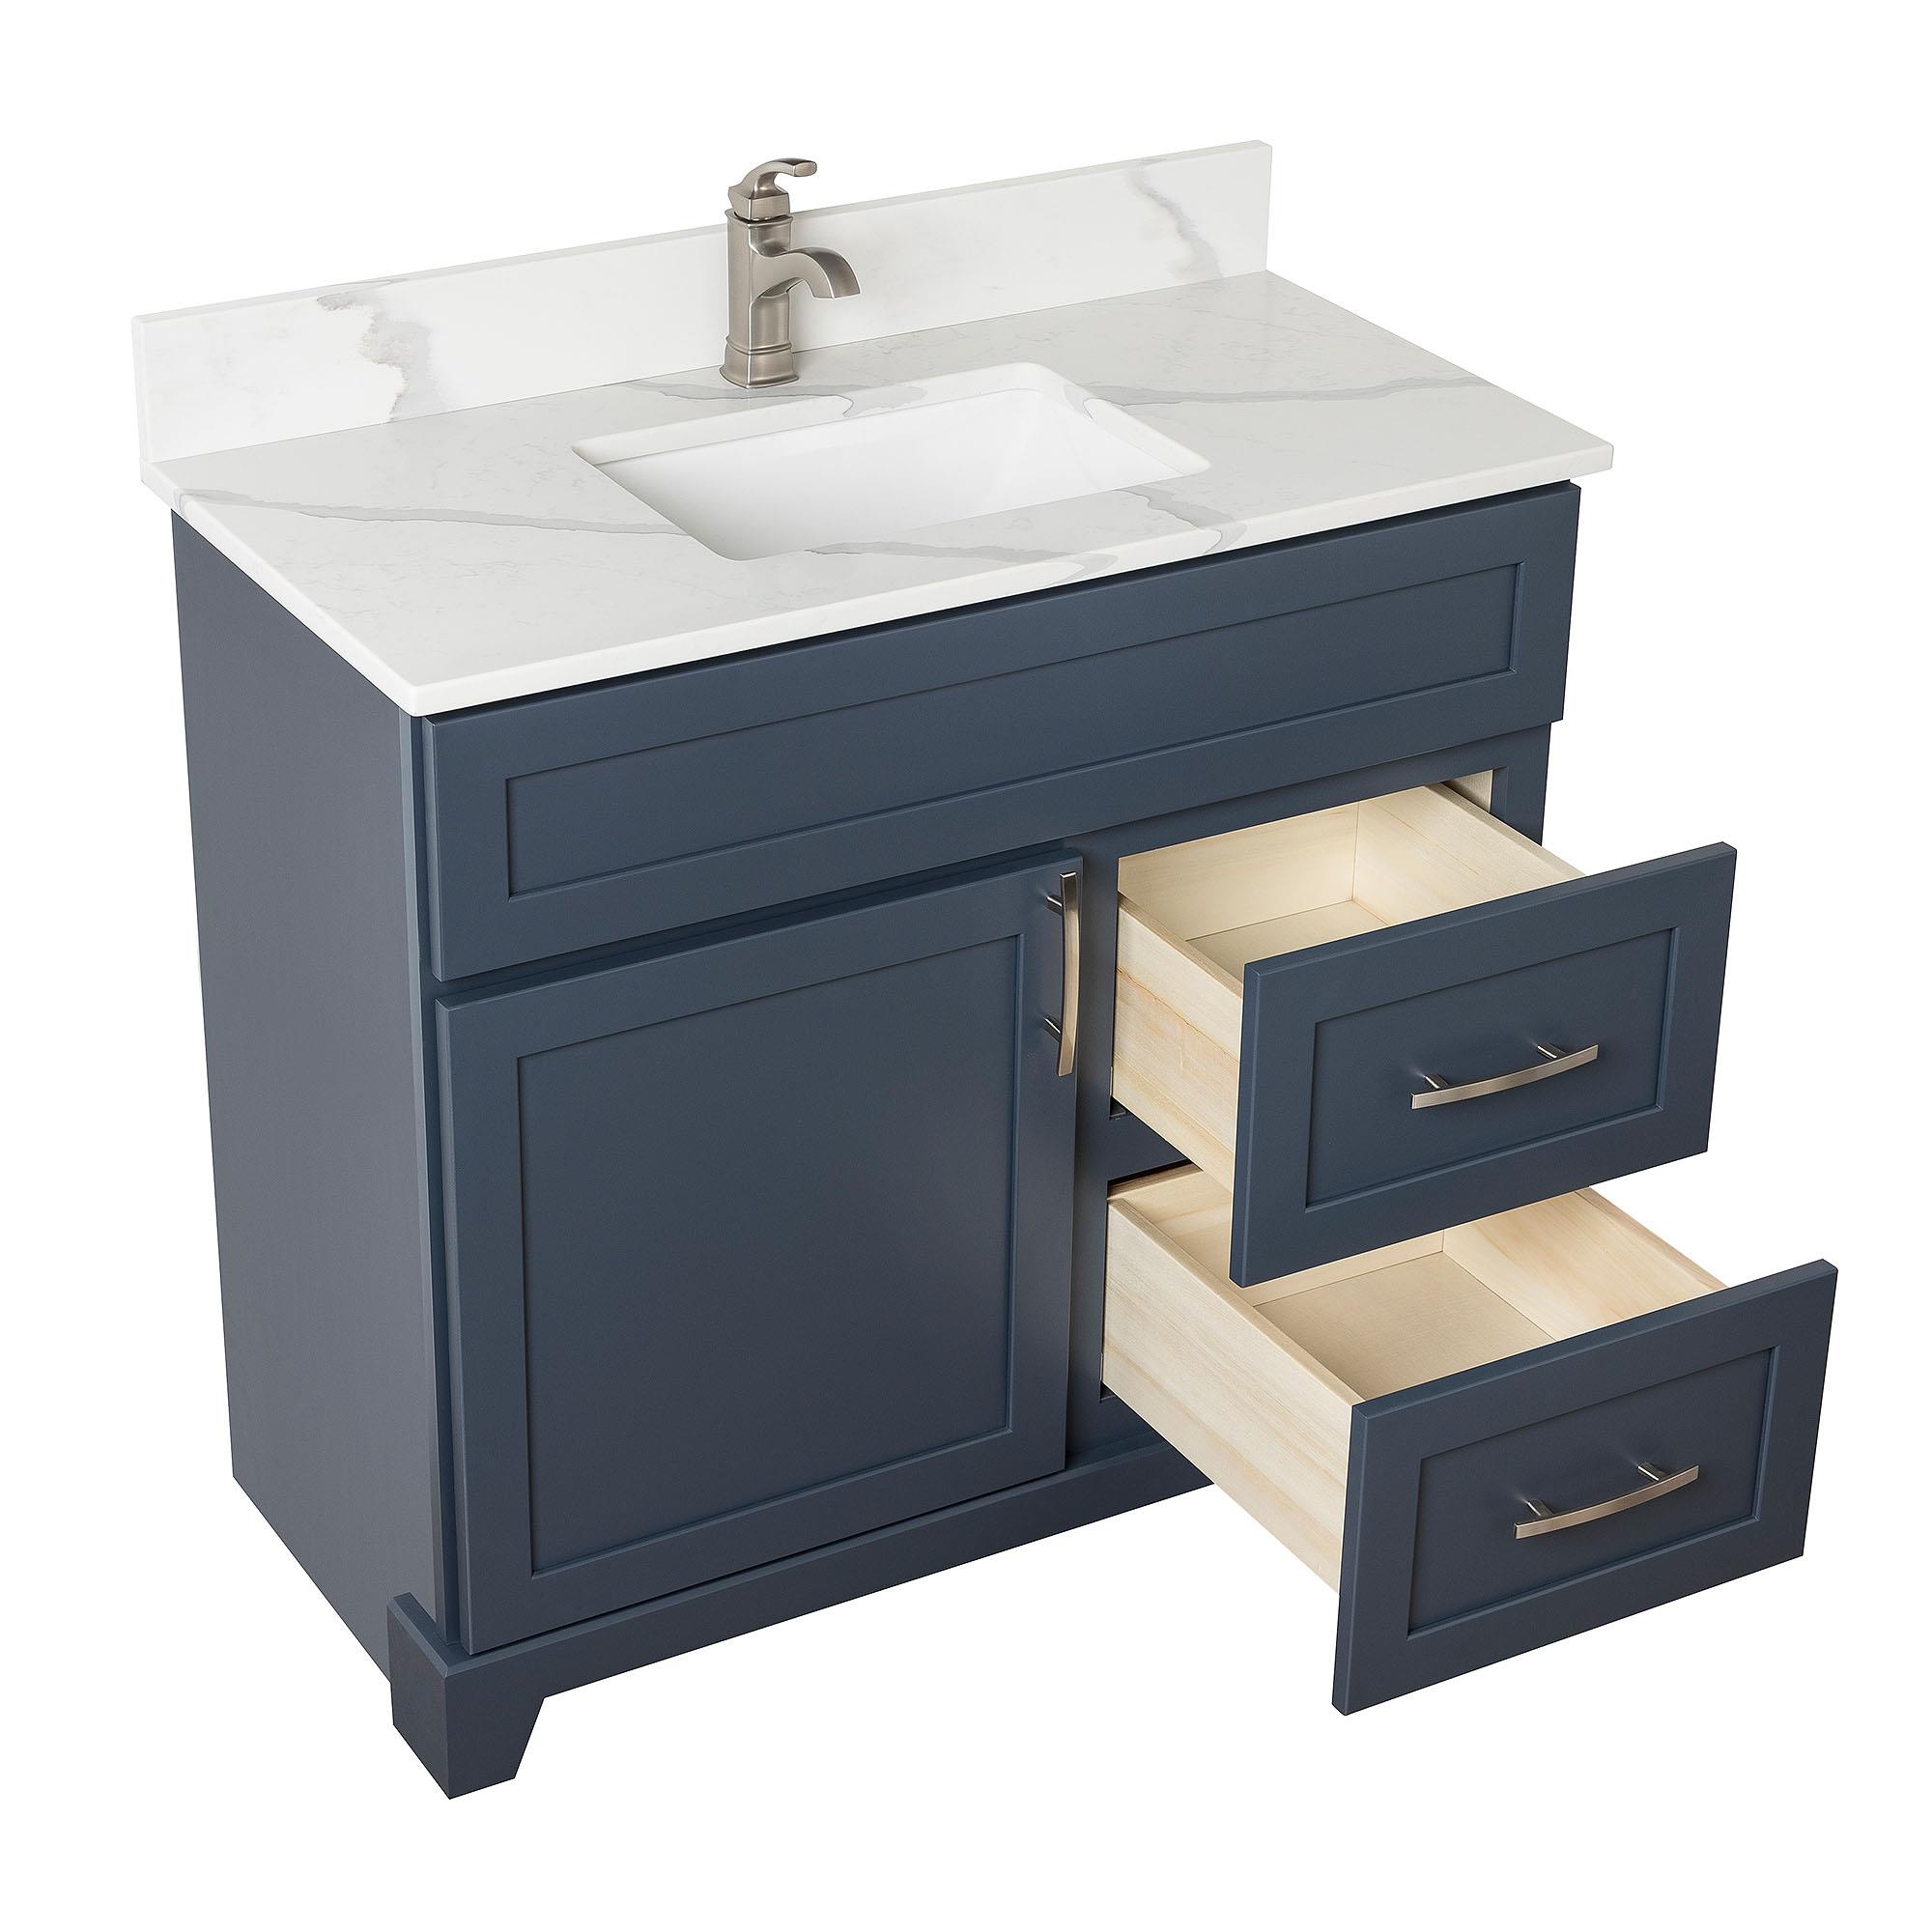 Stonewood Vanity and Countertop Combo Collection - Shallow Depth ...